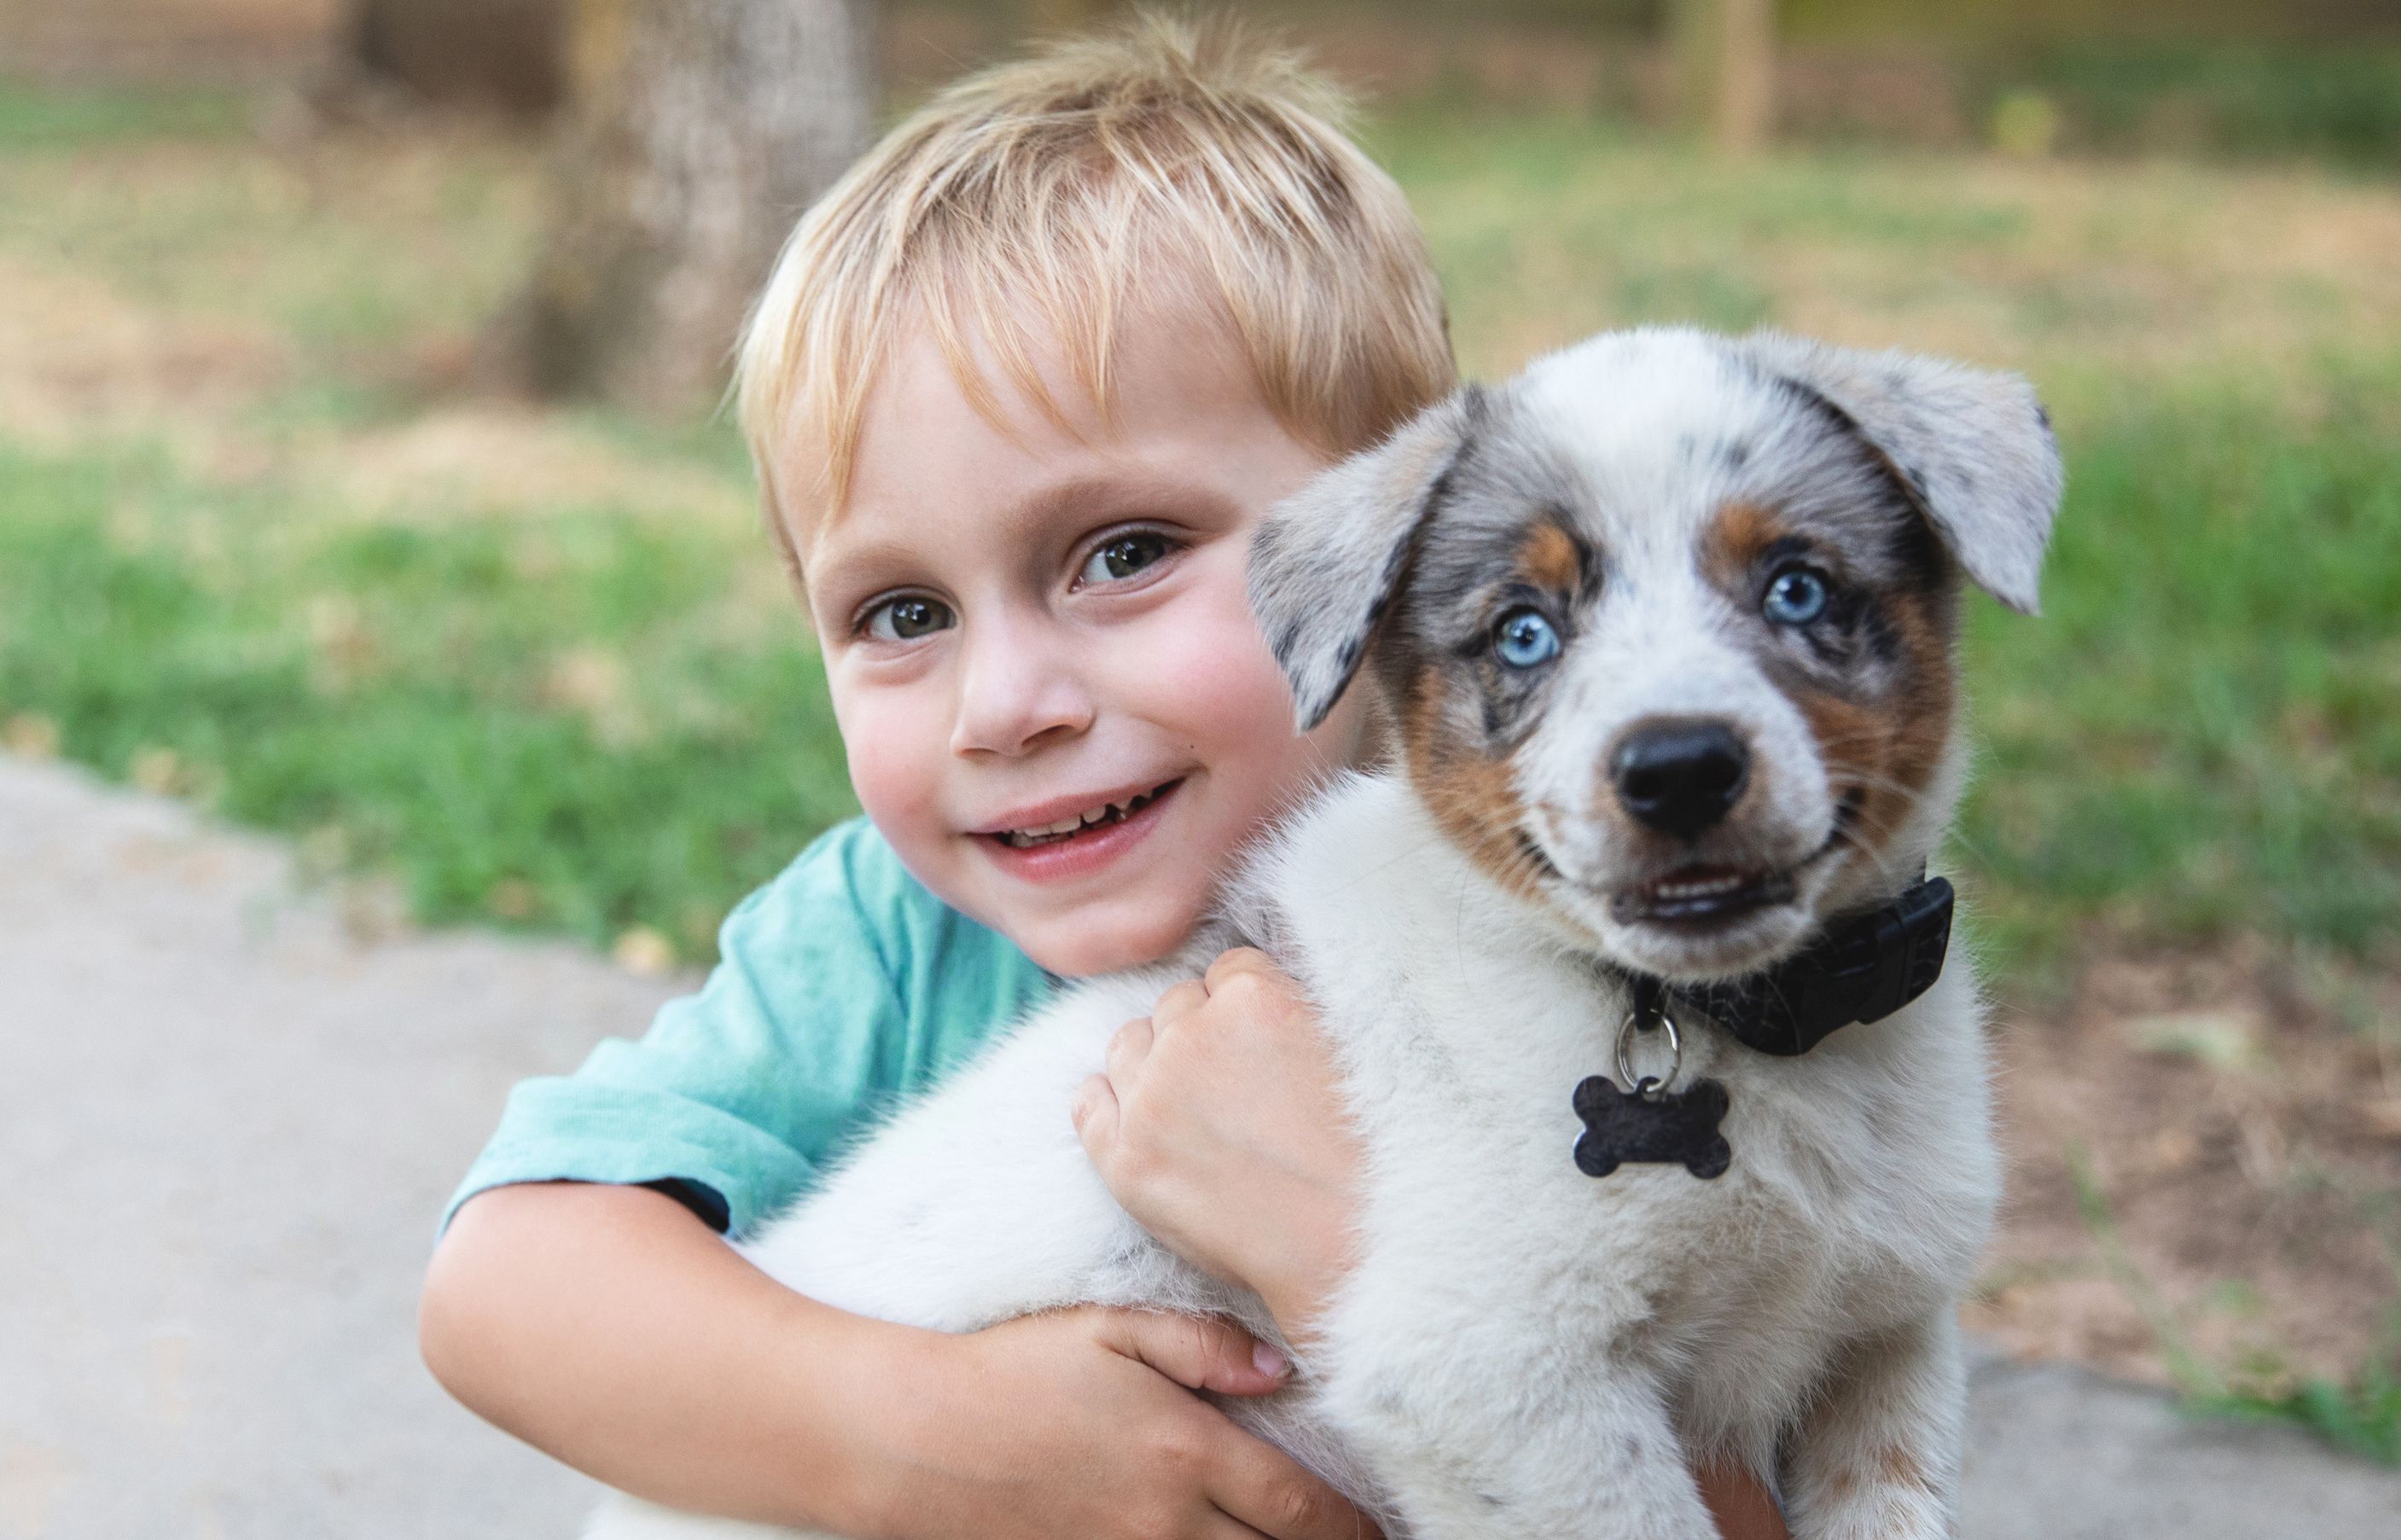 A little boy smiling while carrying a puppy.